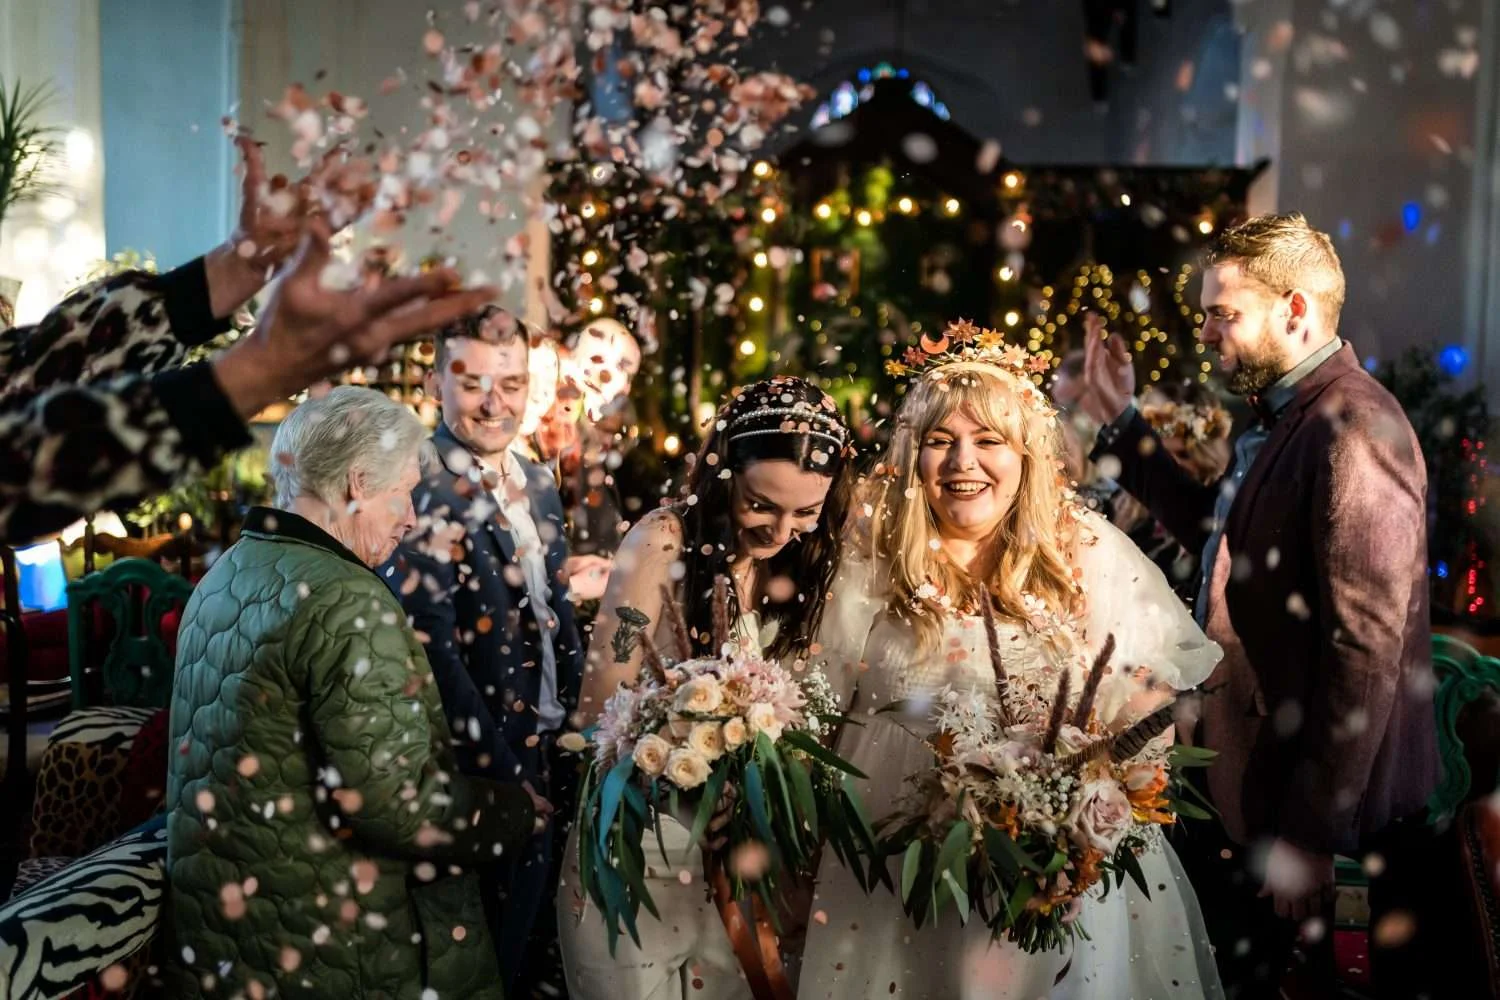 planning your wedding timeline to allow confetti shots in style